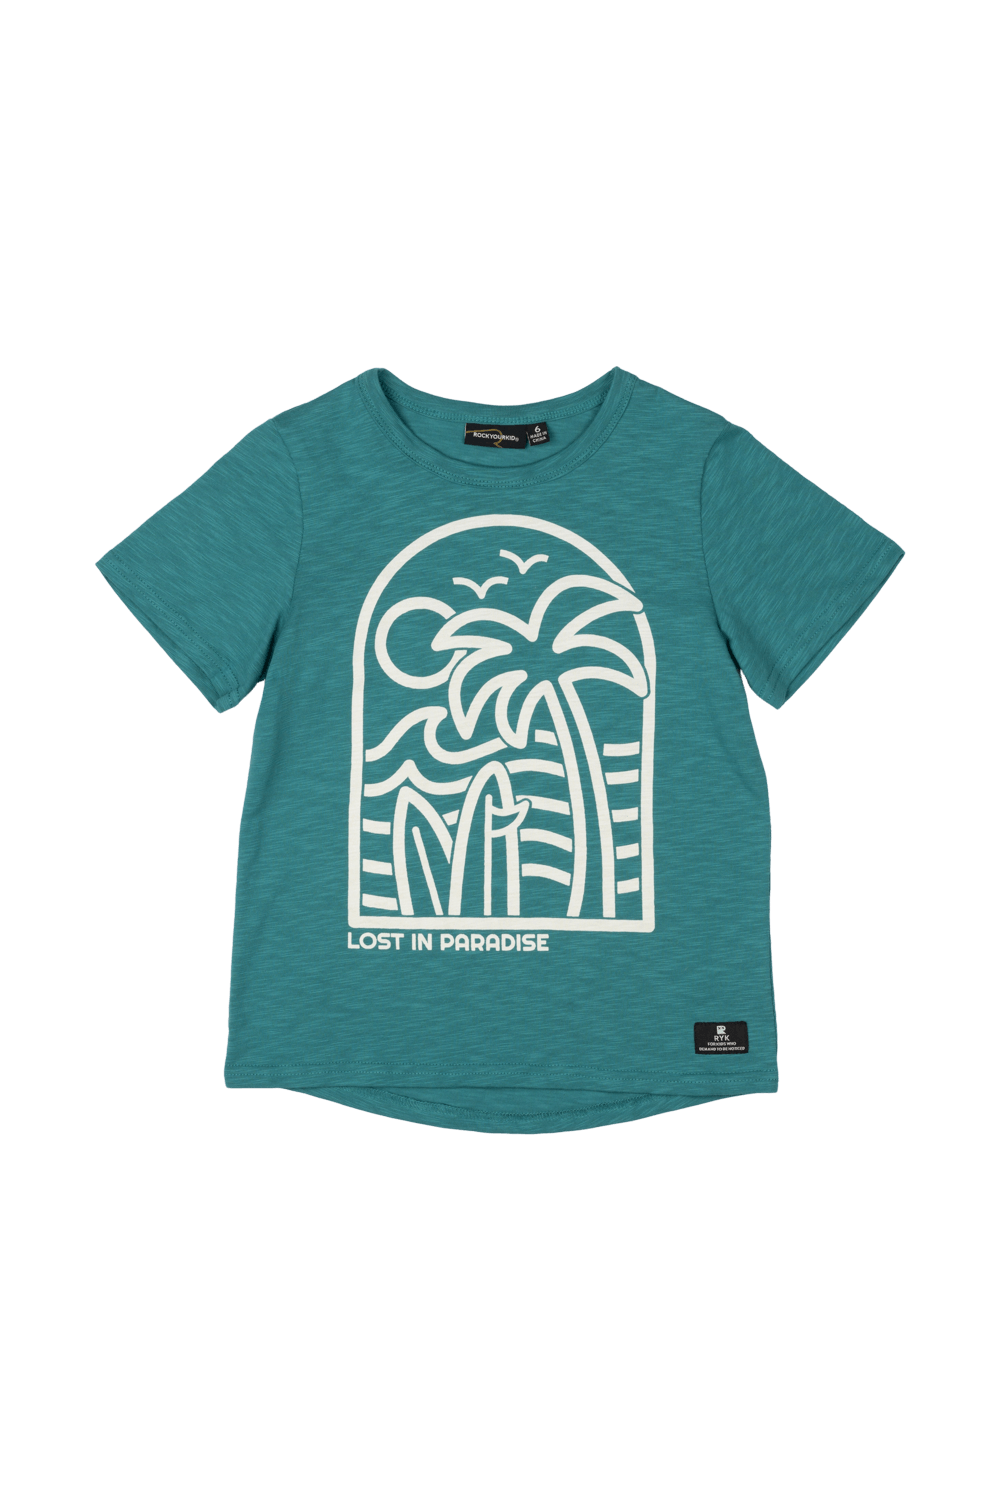 LOST IN PARADISE T-SHIRT